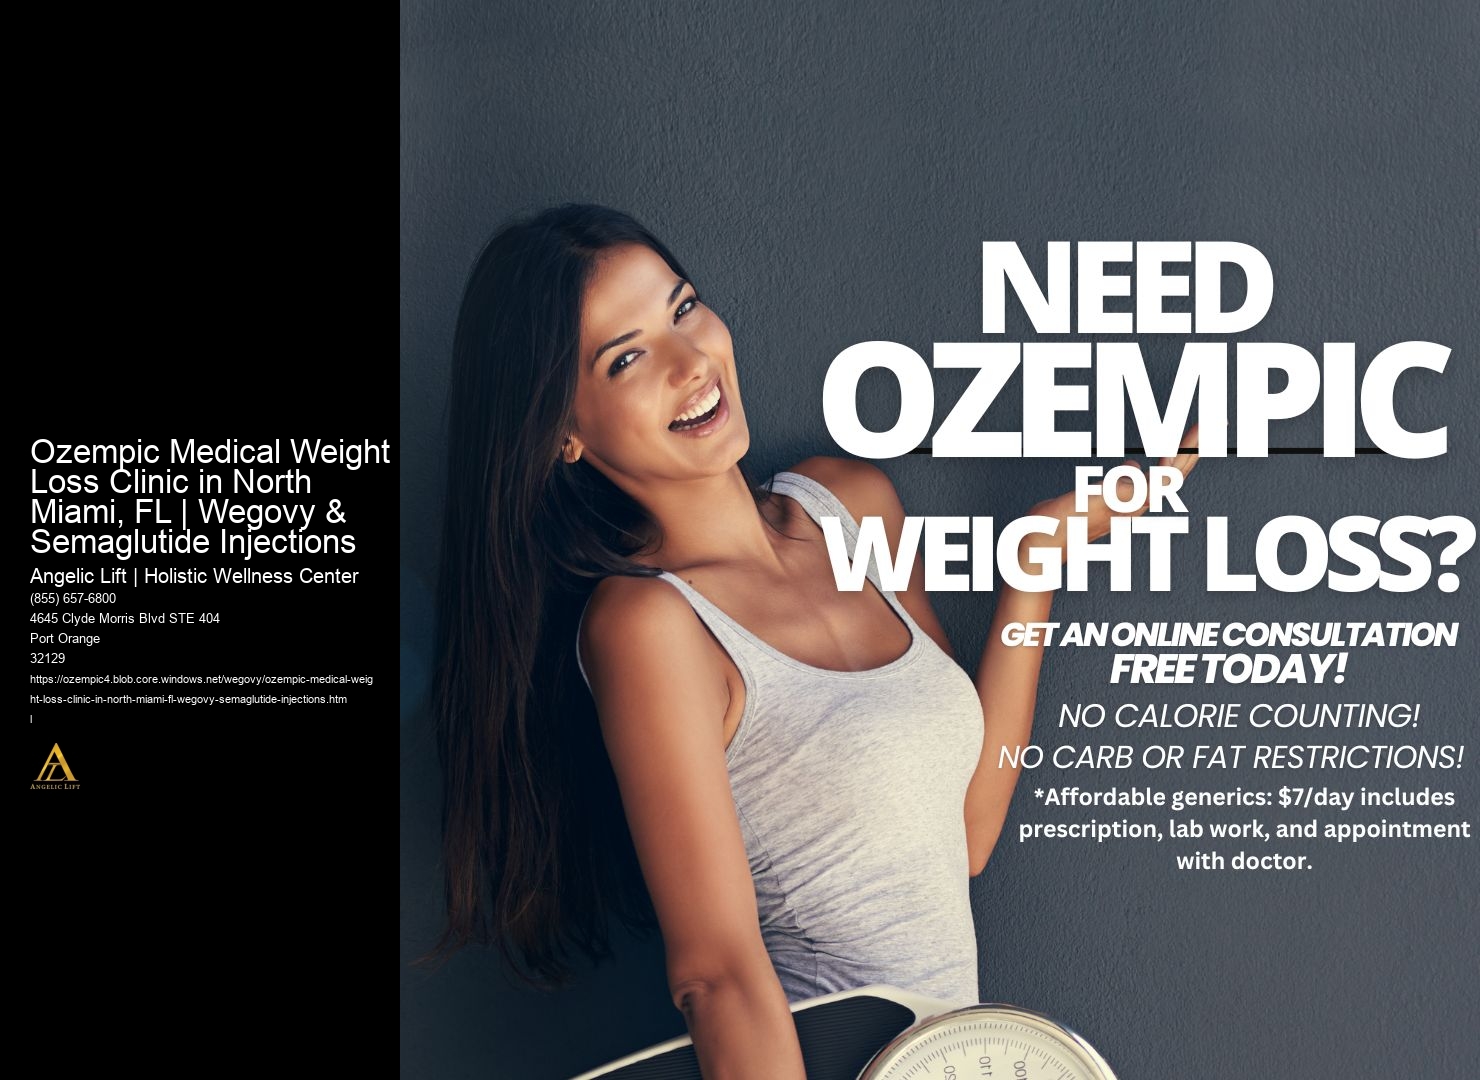 Ozempic Medical Weight Loss Clinic in North Miami, FL | Wegovy & Semaglutide Injections